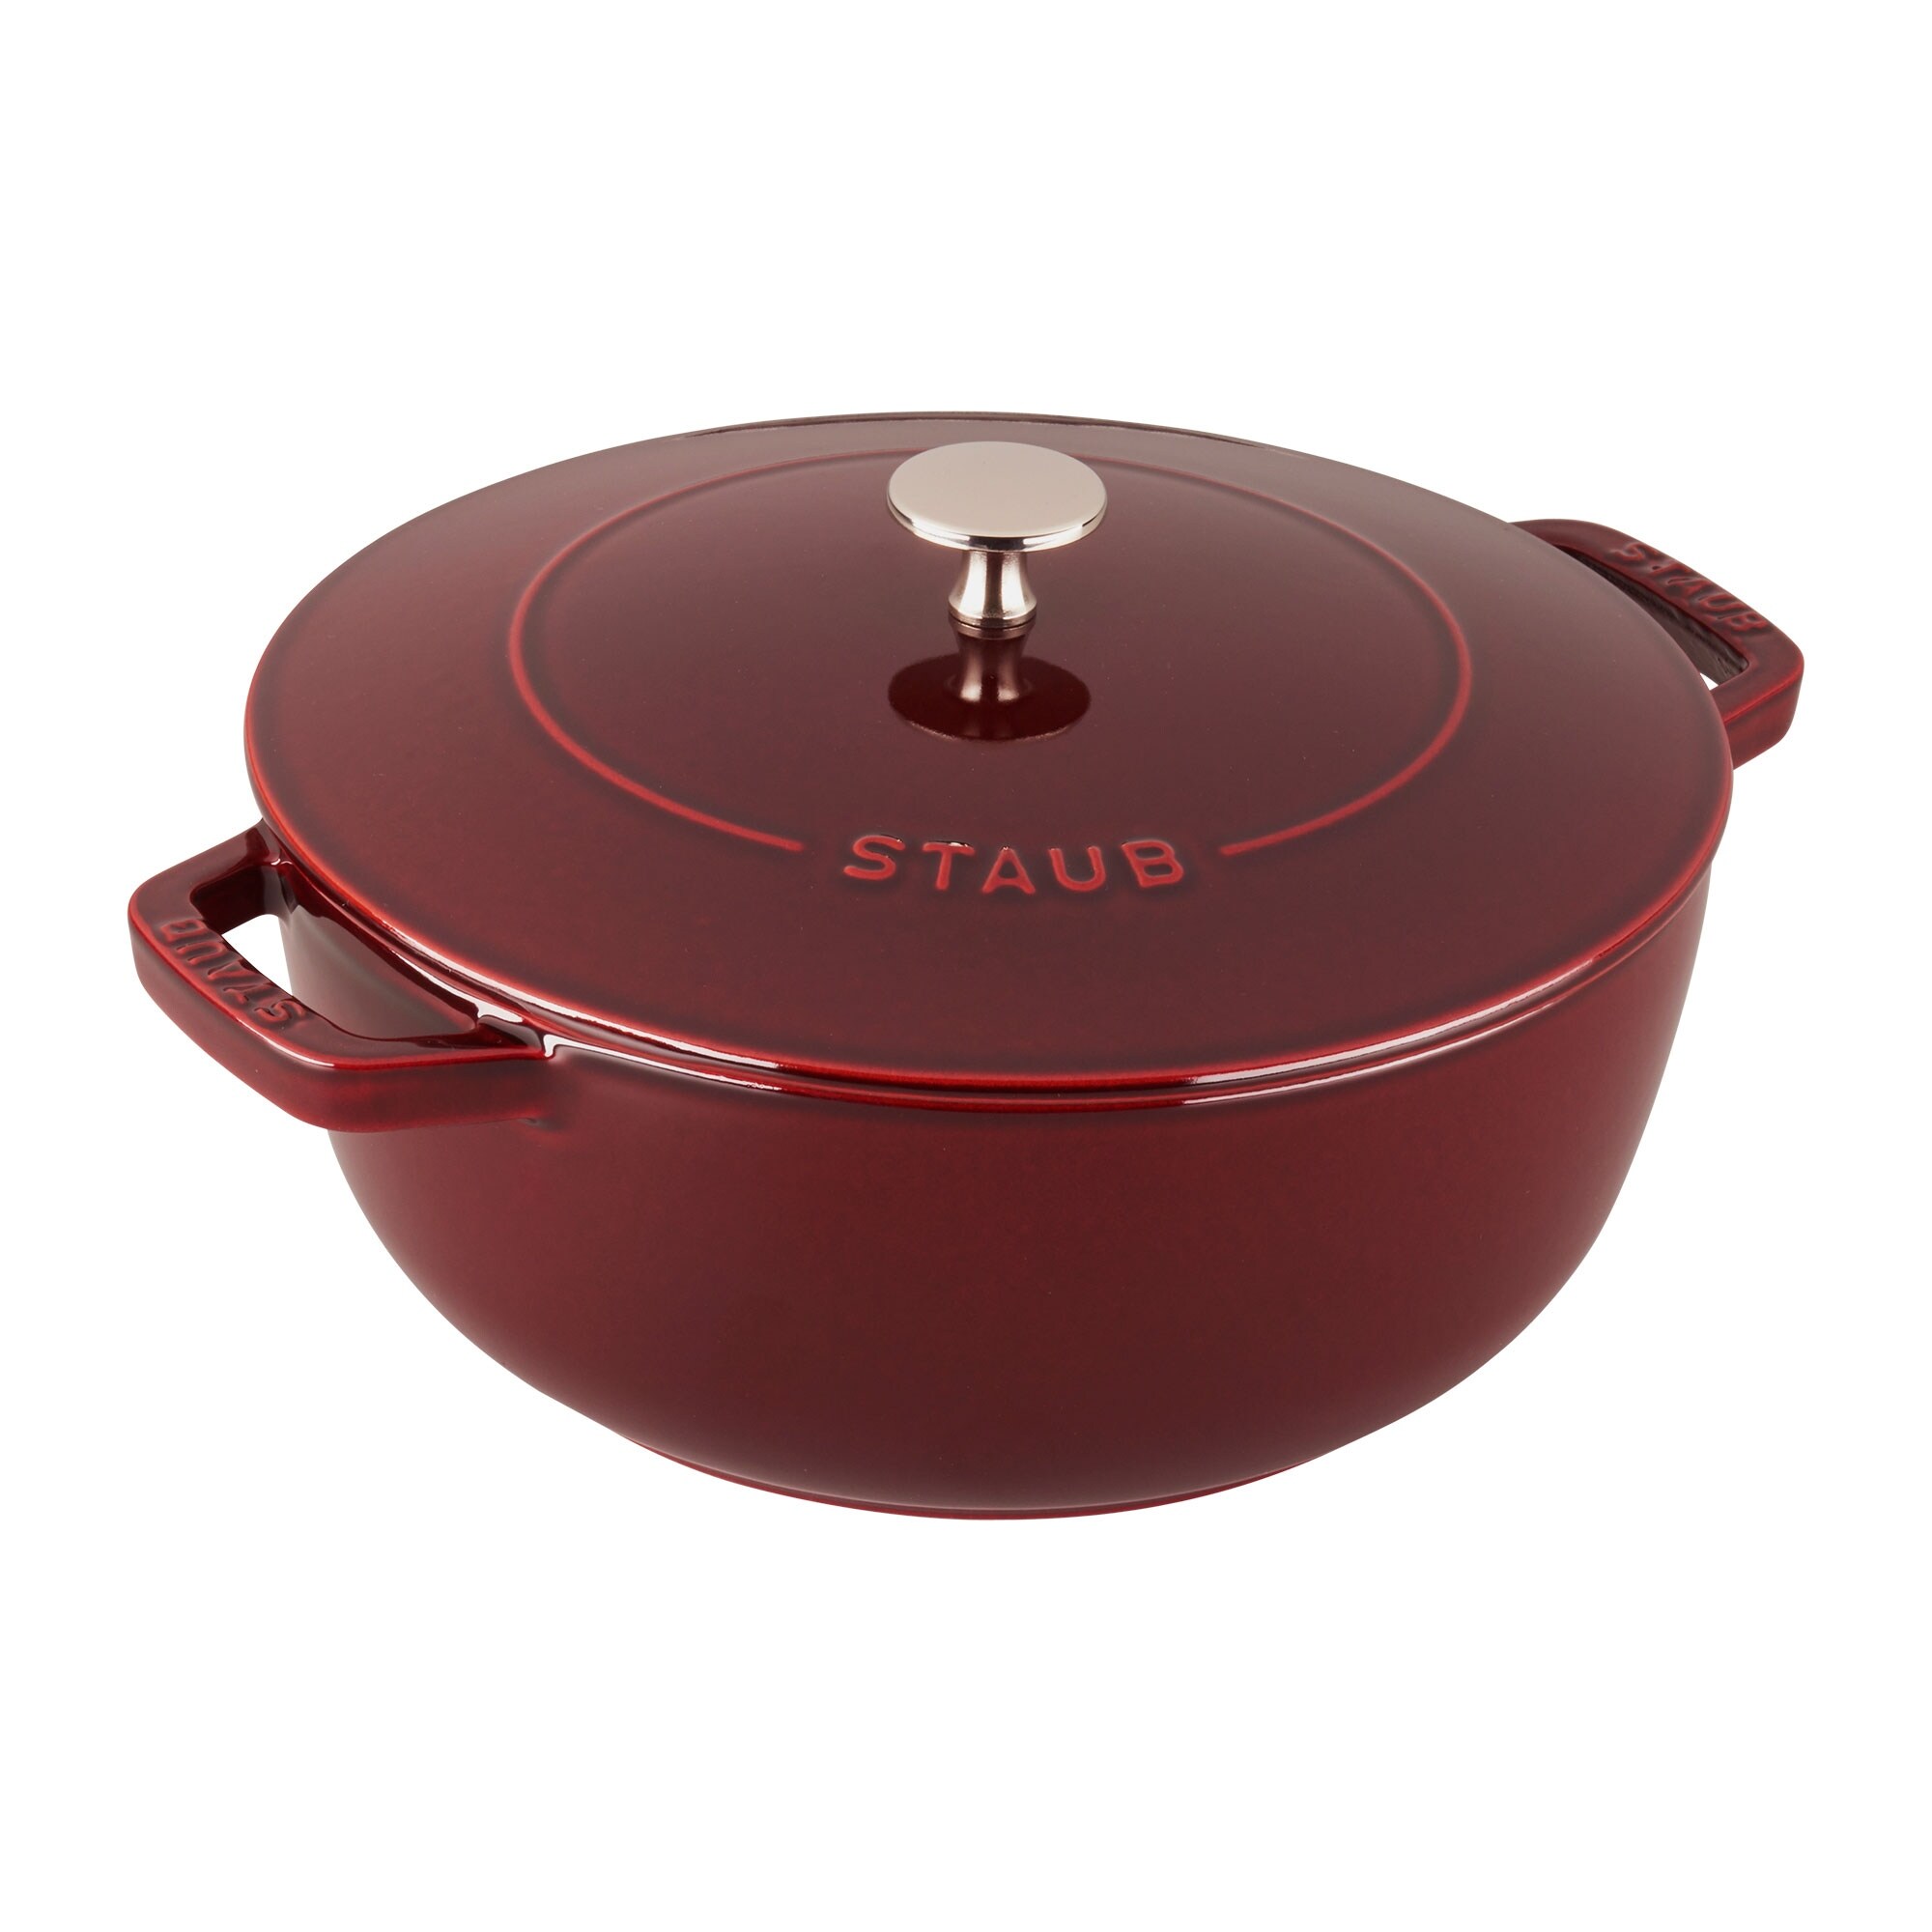 https://ak1.ostkcdn.com/images/products/is/images/direct/fe21538bab0f3607917137cb51beb21d1db7944f/STAUB-Cast-Iron-3.75-qt-Essential-French-Oven.jpg